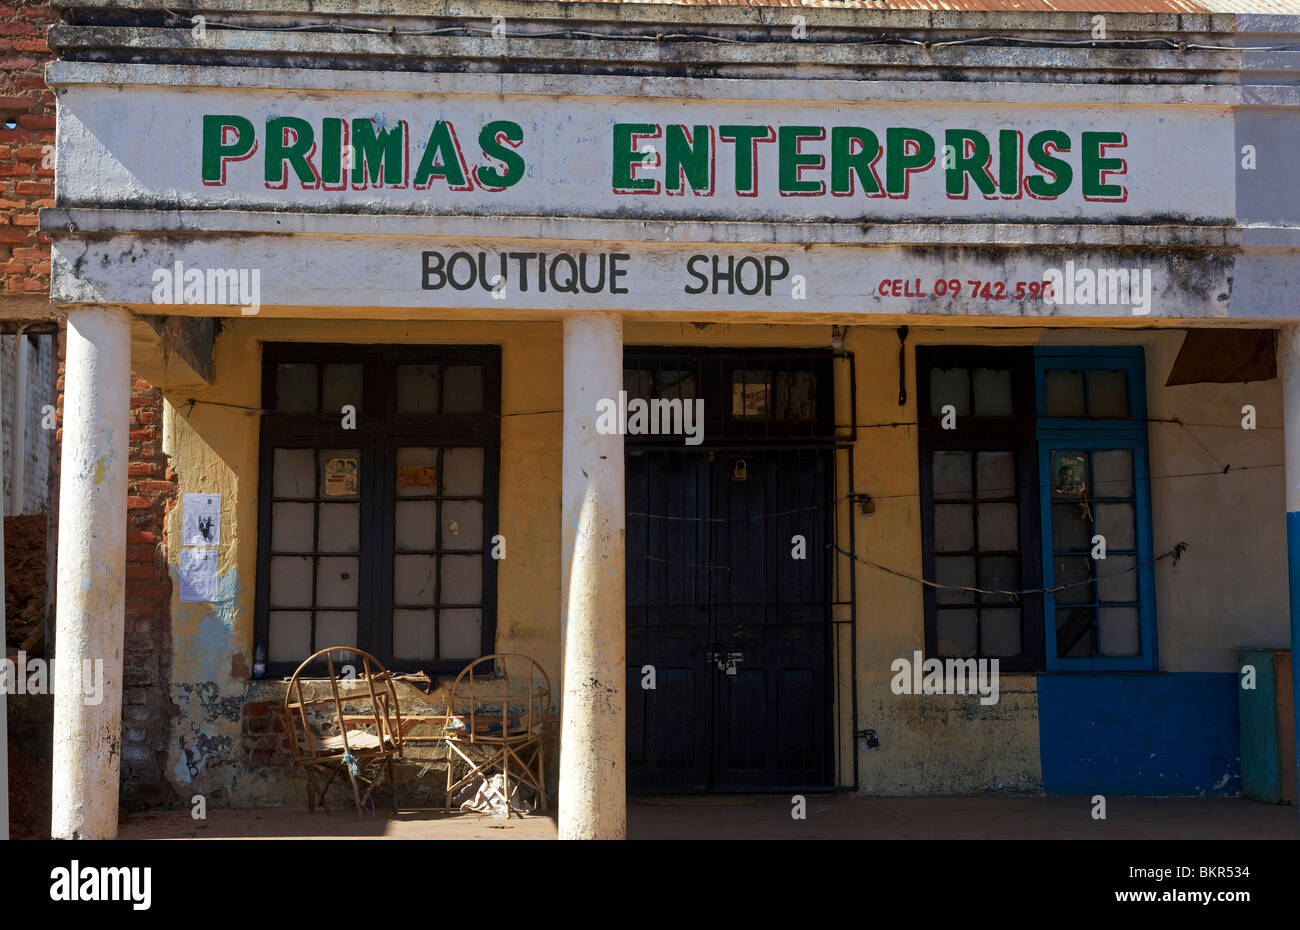 Malawi, Zomba. Ramshackle 'Boutique' shop in the centre of Malawi's fomer capital of Zomba Stock Photo